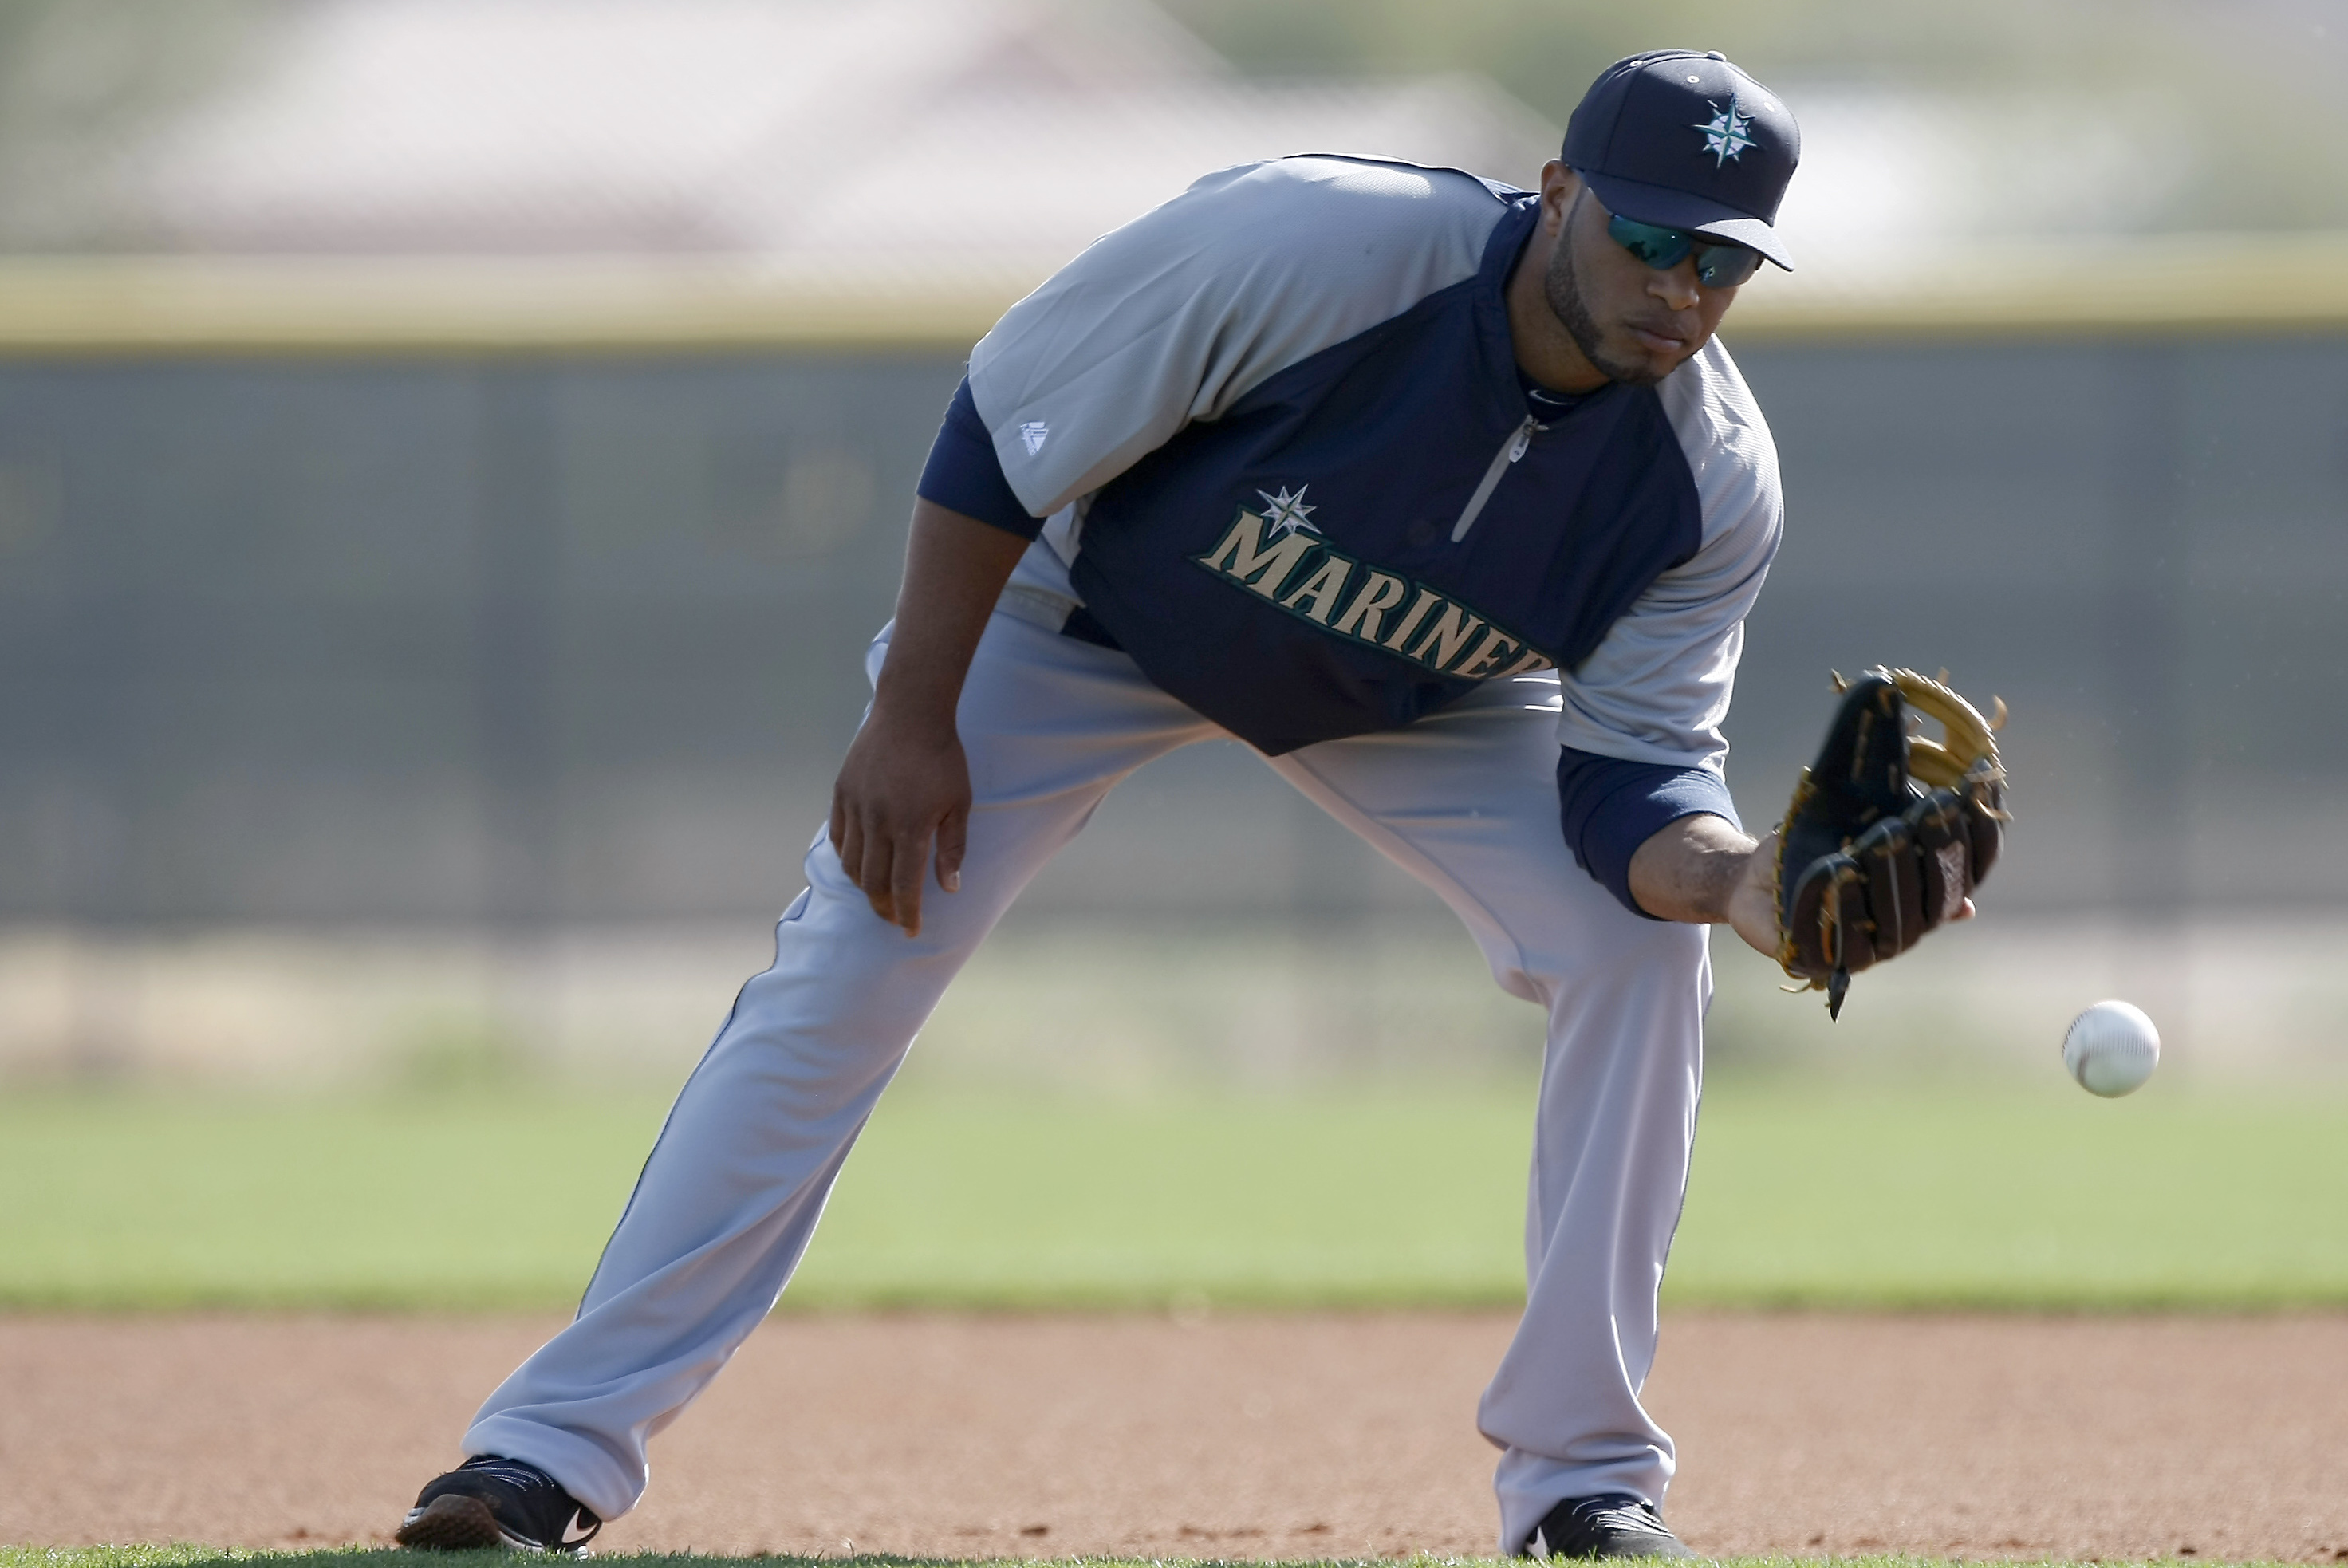 Updates, Takeaways from Robinson Cano's Mariners Spring Training